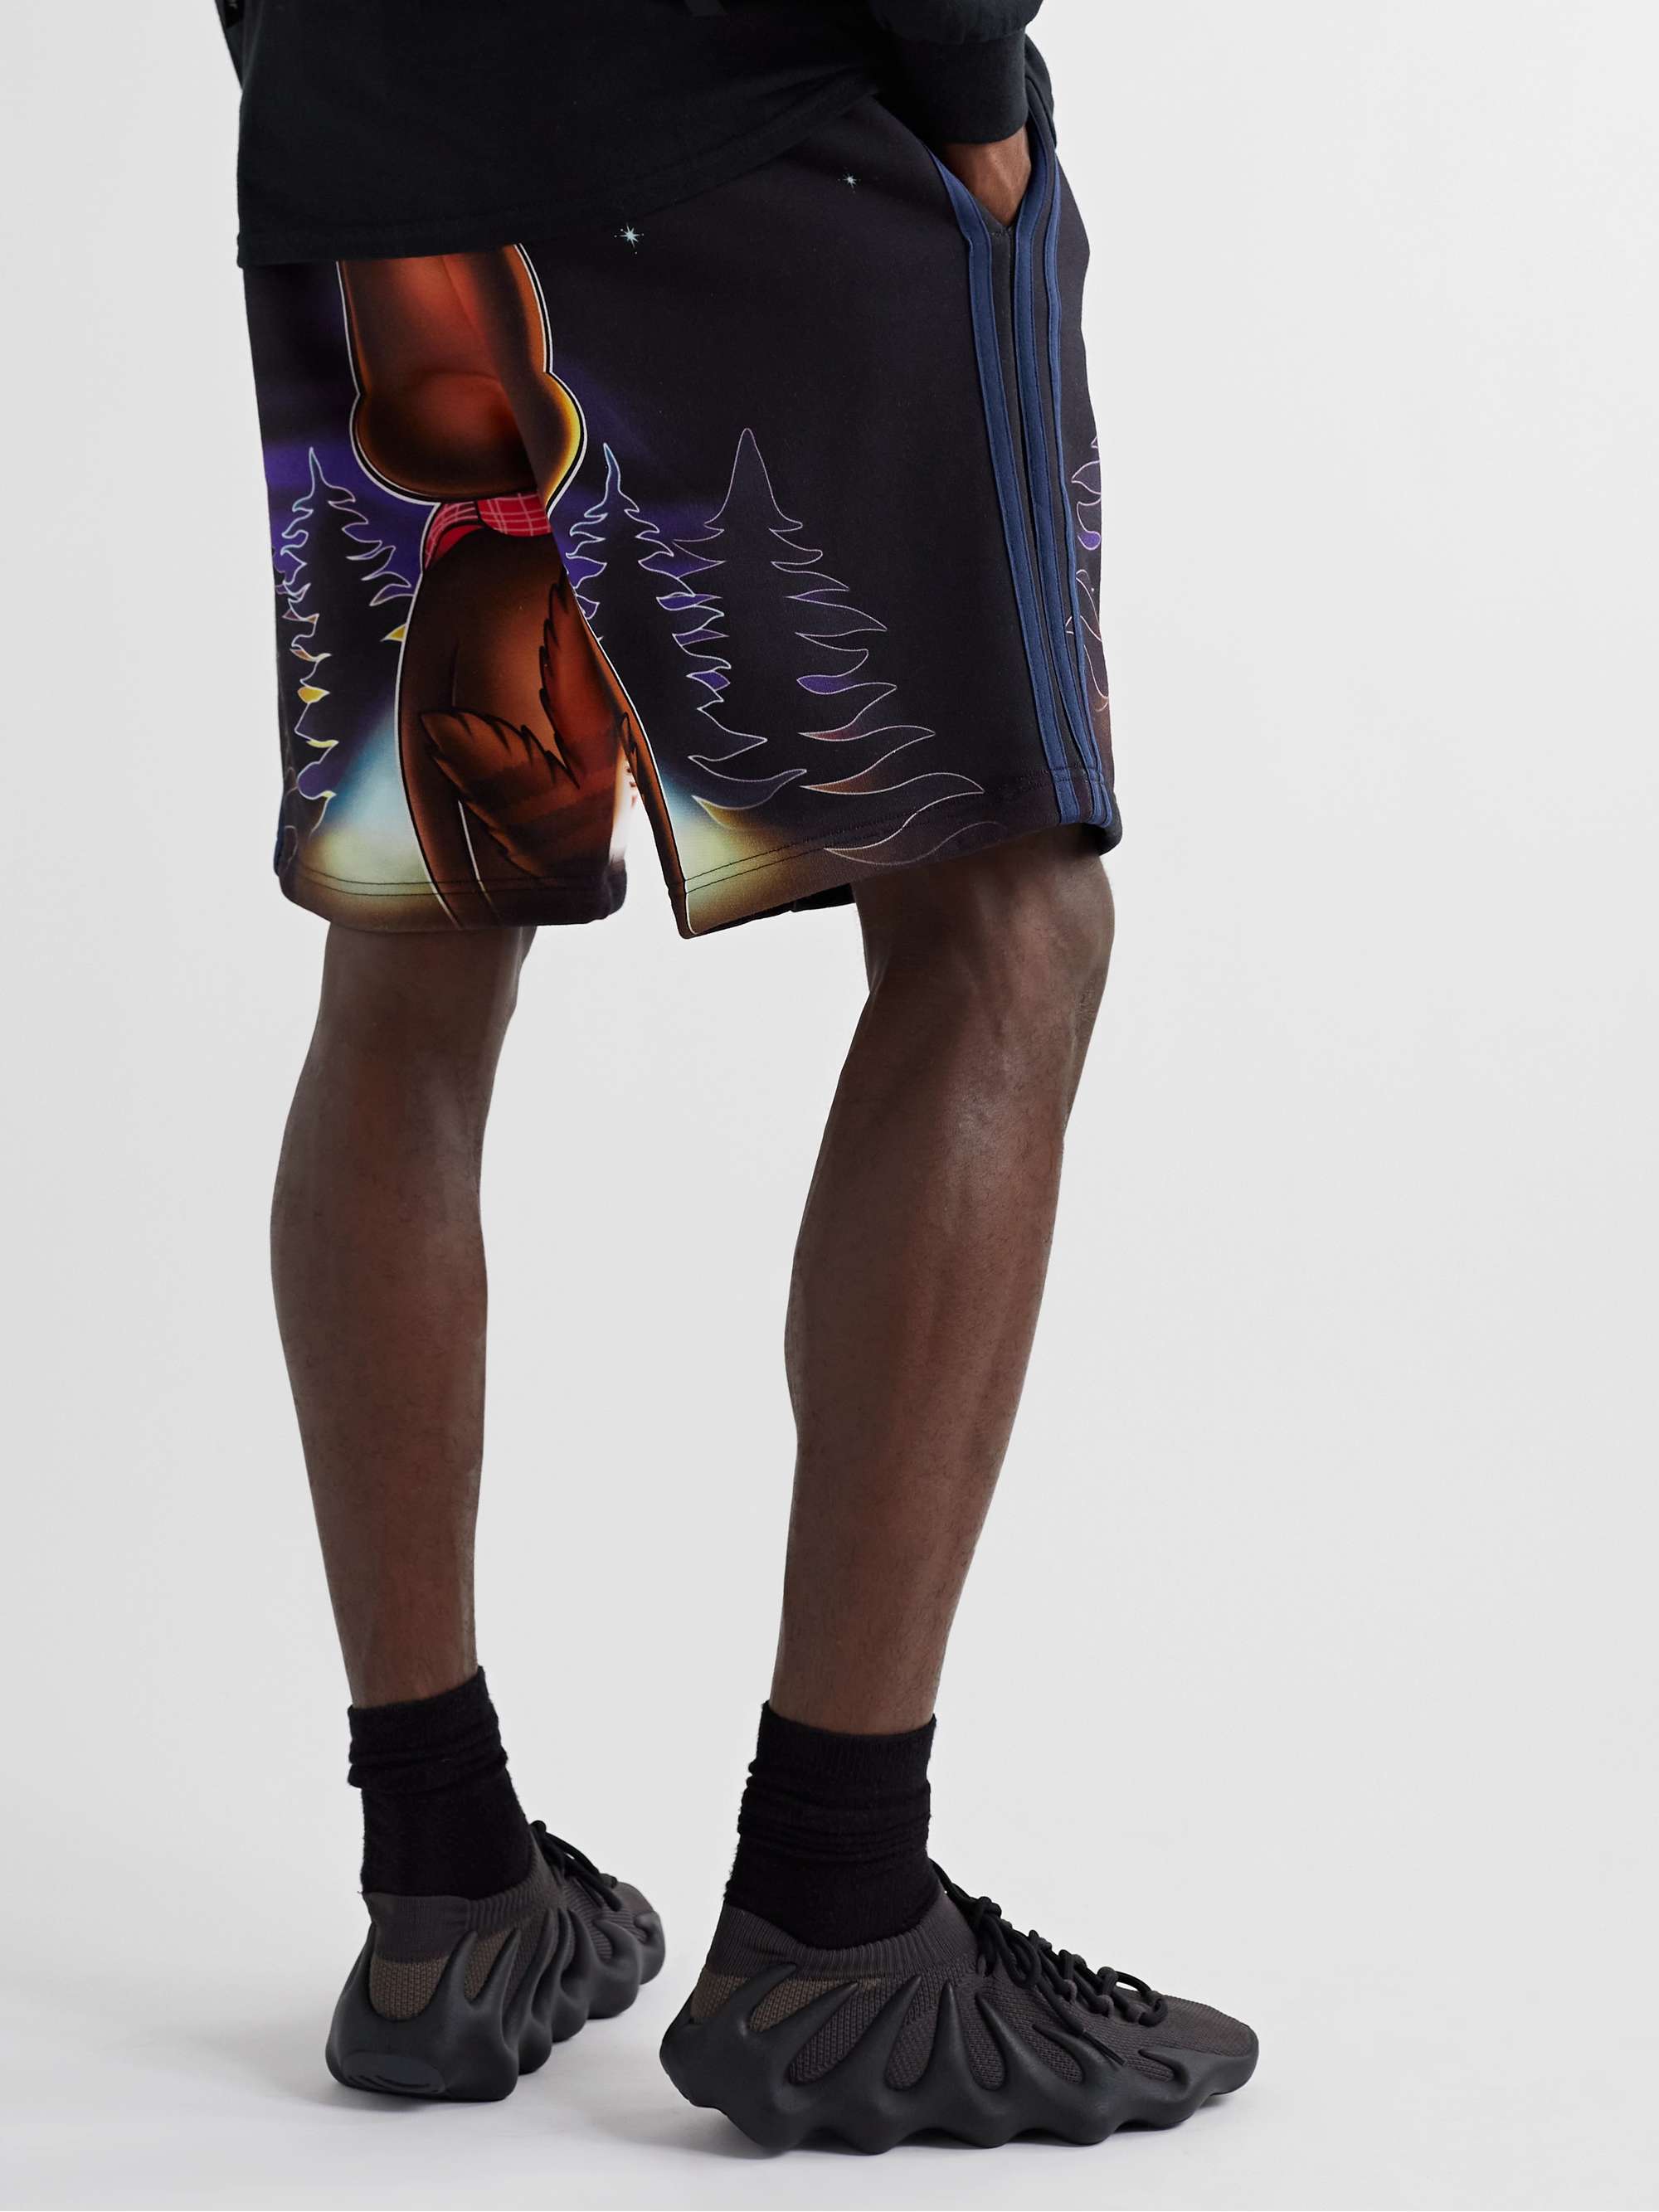 ADIDAS CONSORTIUM + Kerwin Frost Printed Cotton-Jersey Shorts